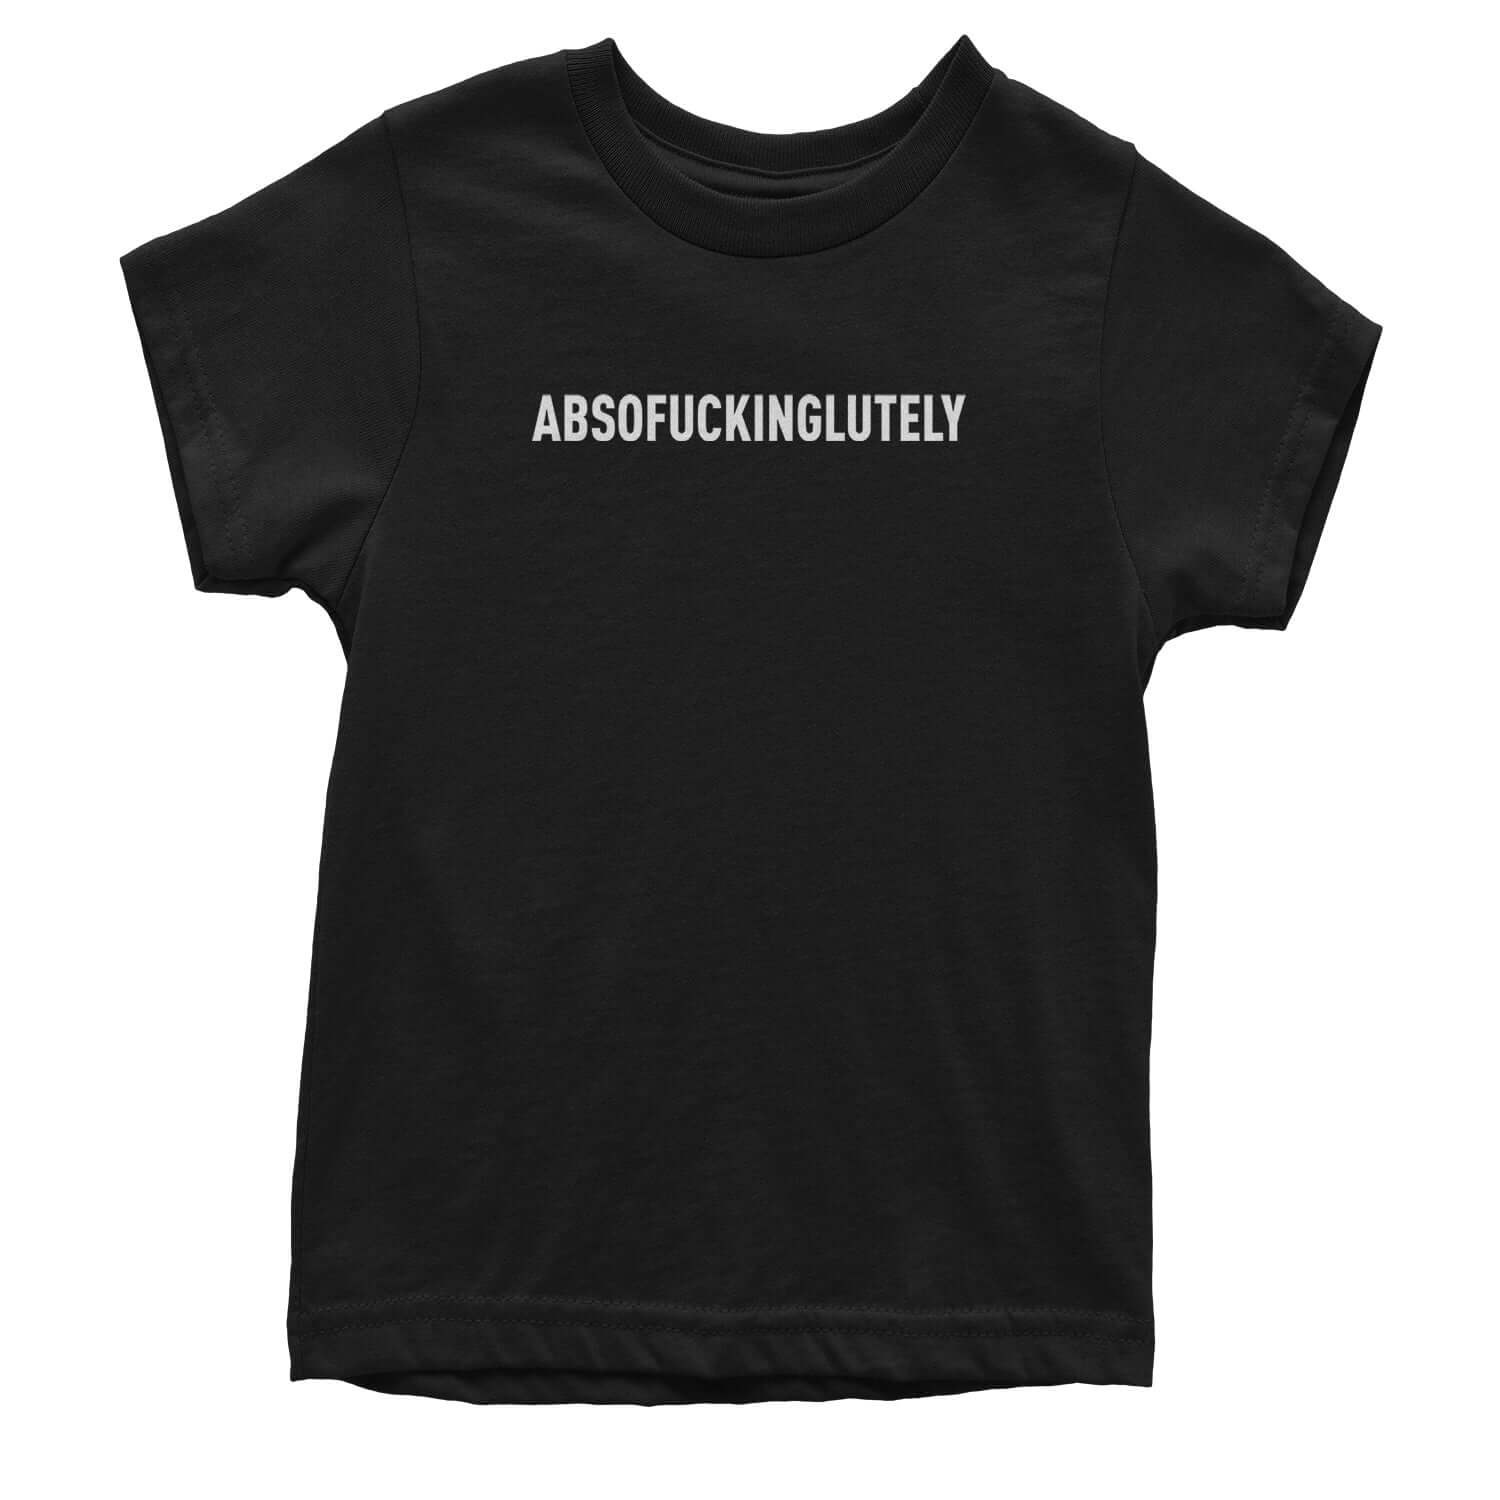 Abso f-cking lutely Youth T-shirt funny, shirt by Expression Tees